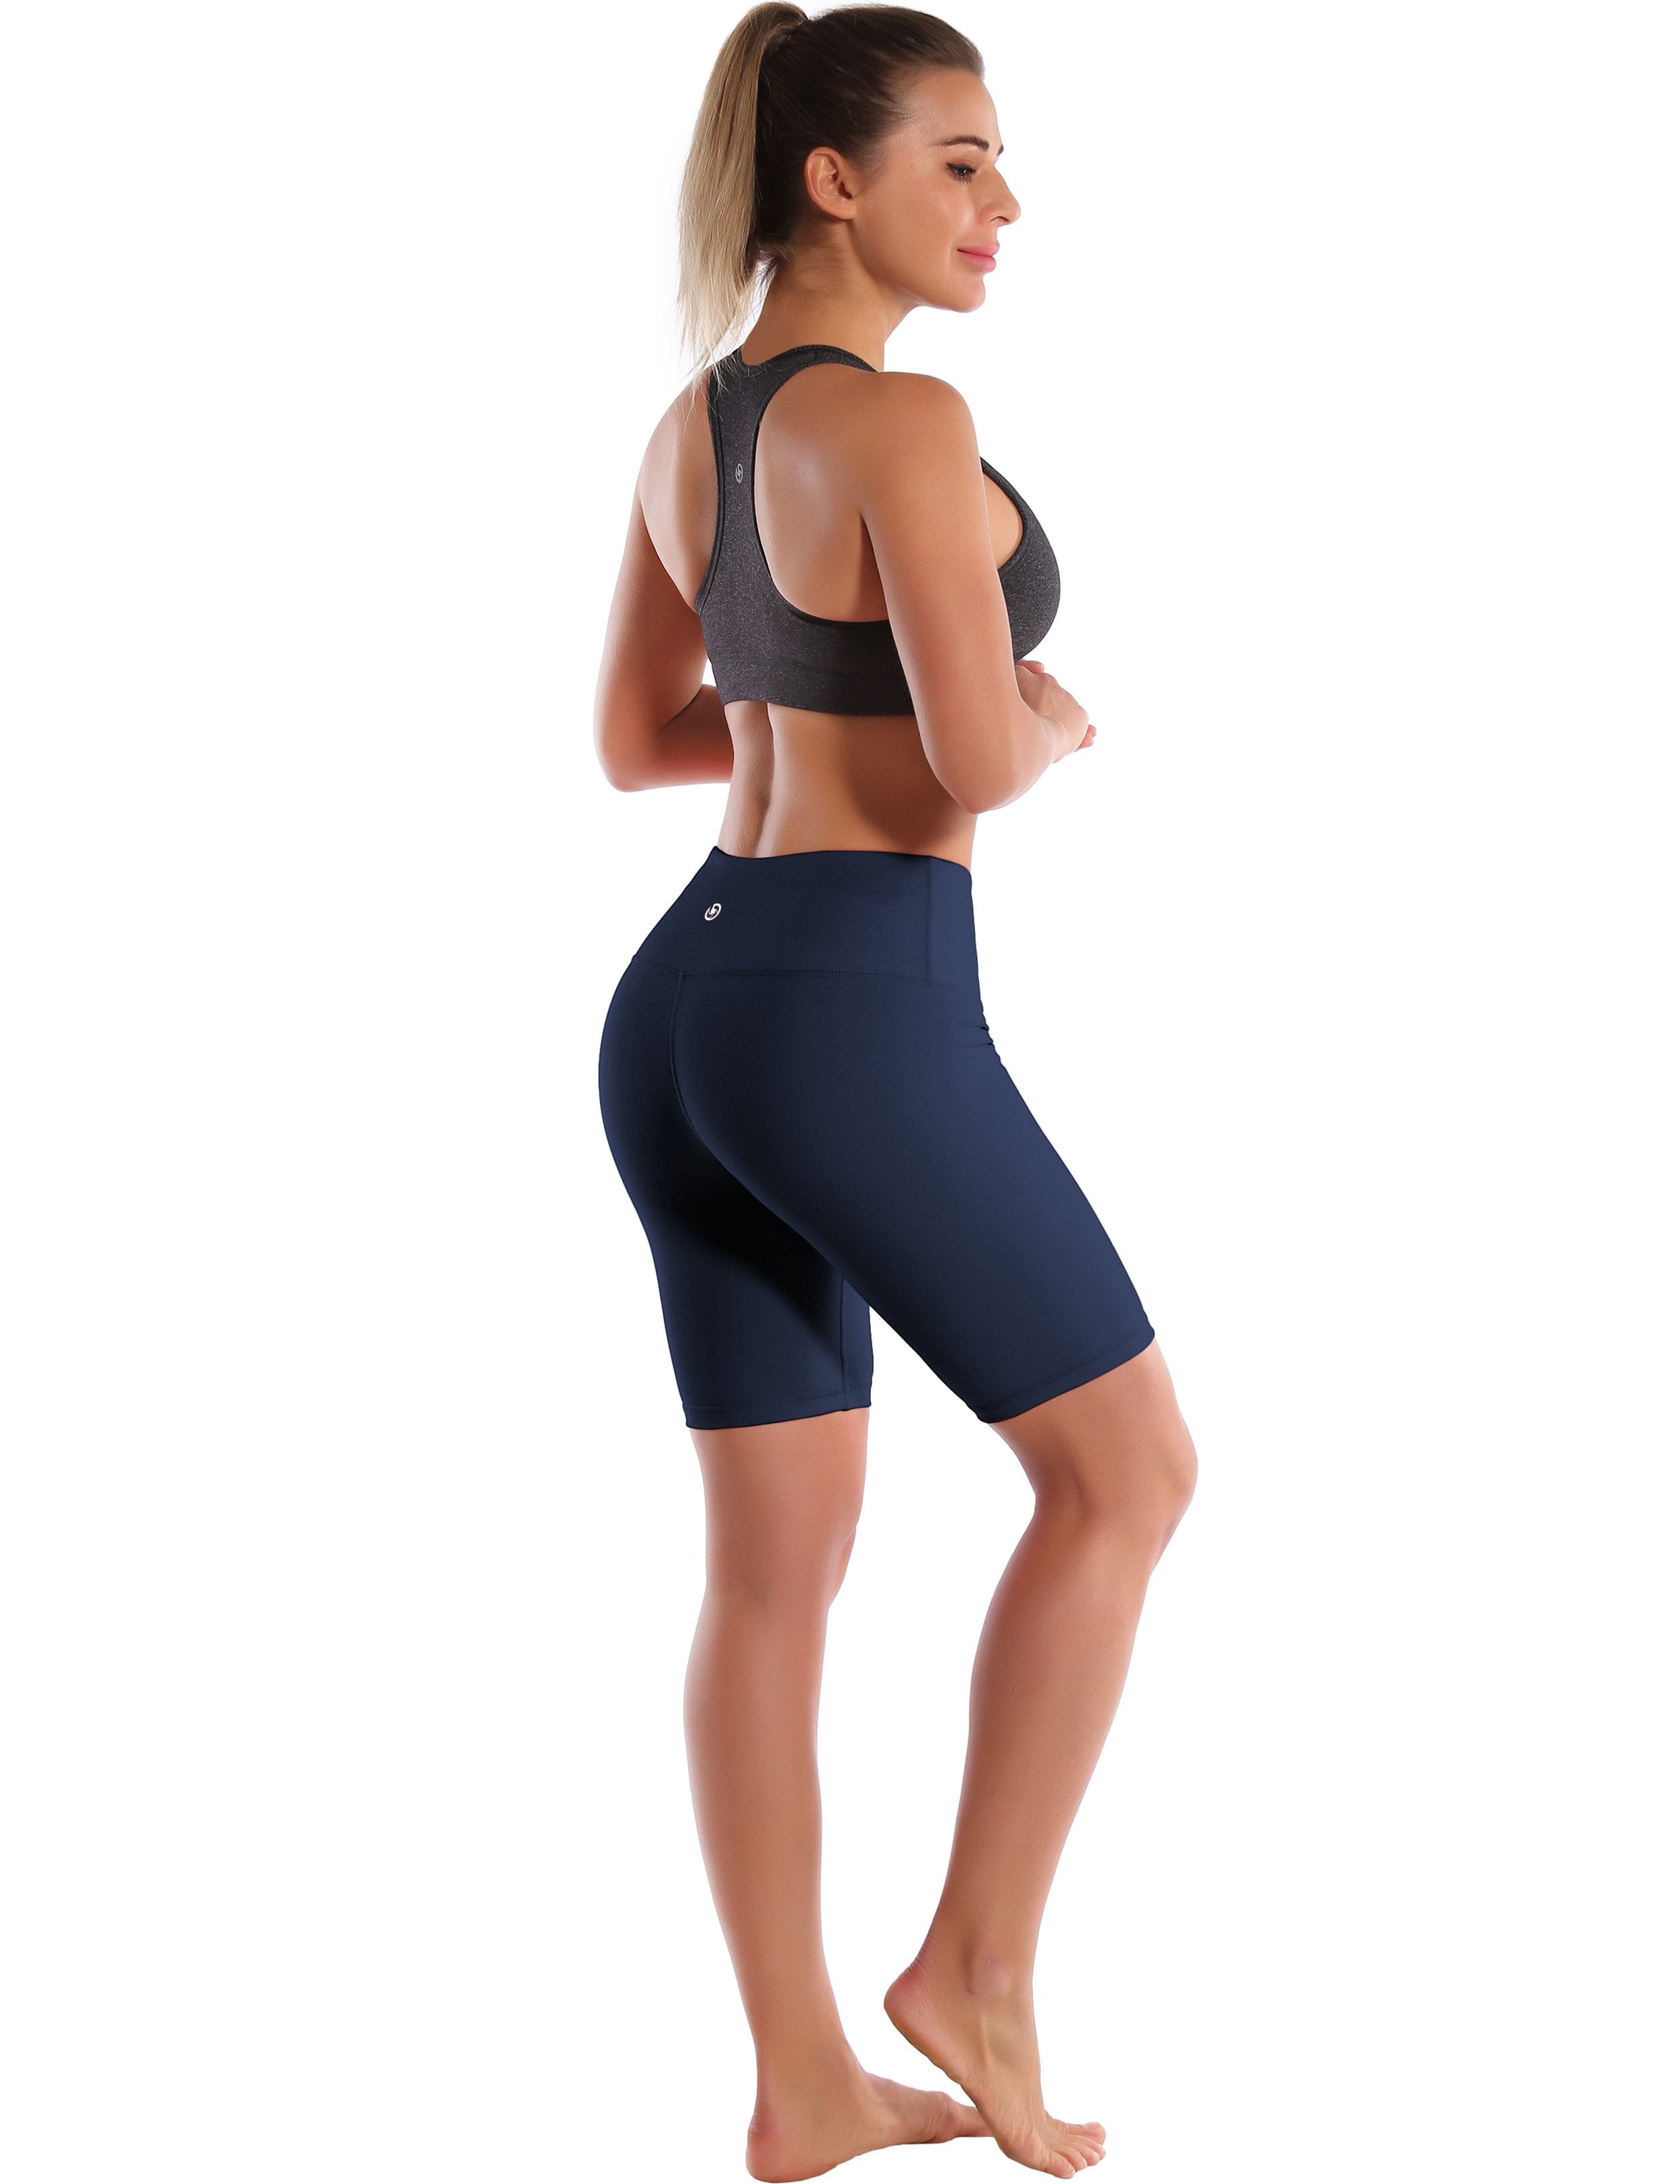 8" High Waist Yoga Shorts darknavy Sleek, soft, smooth and totally comfortable: our newest style is here. Softest-ever fabric High elasticity High density 4-way stretch Fabric doesn't attract lint easily No see-through Moisture-wicking Machine wash 75% Nylon, 25% Spandex